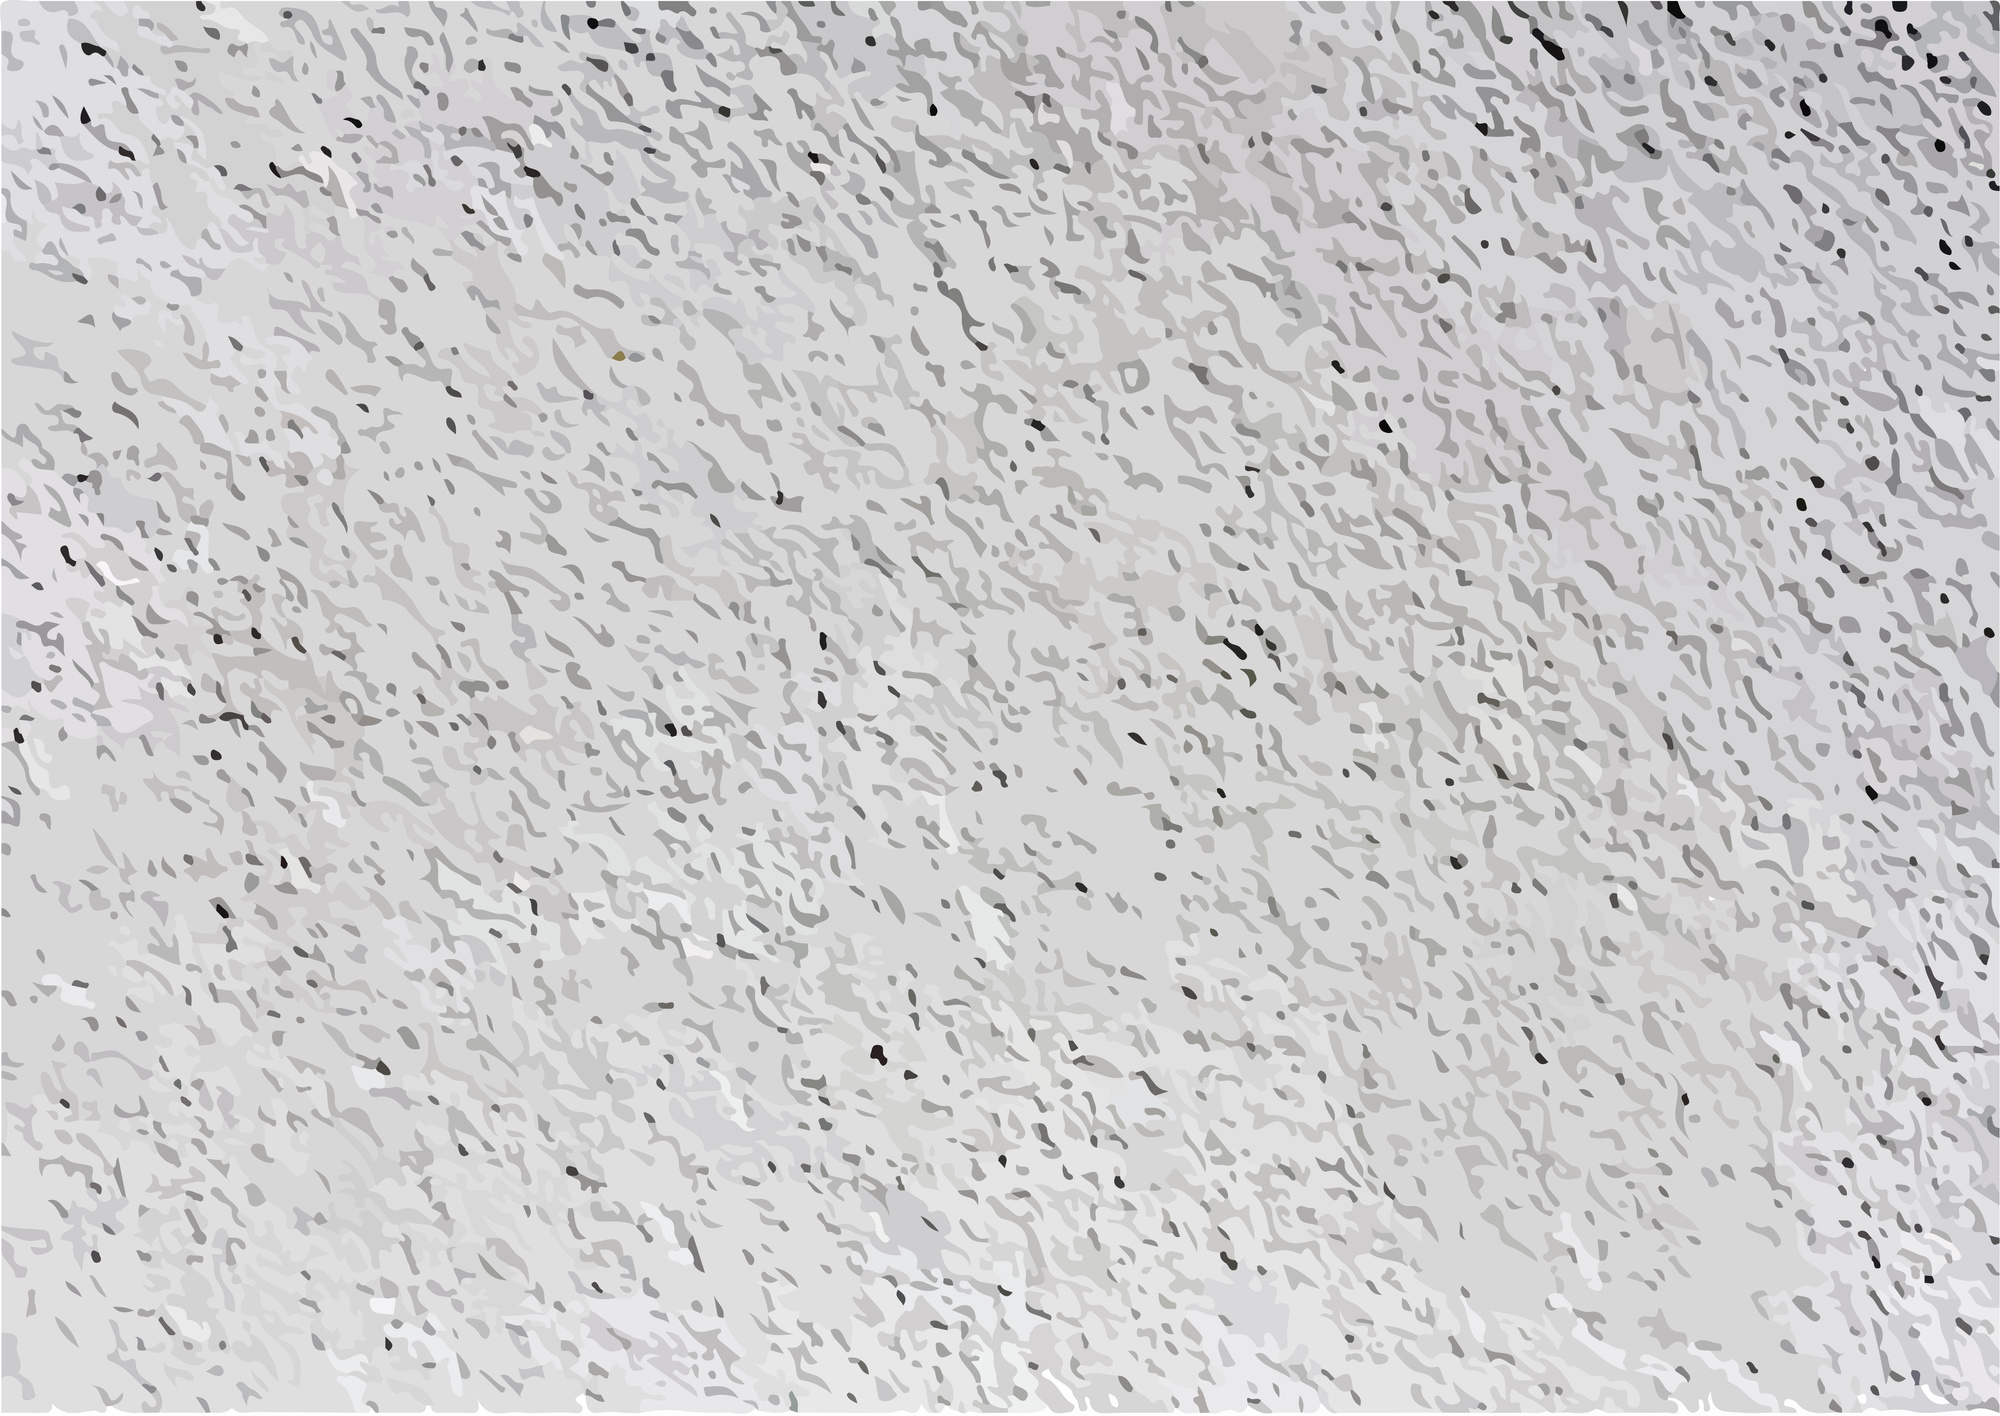 Cement Wall Texture Background